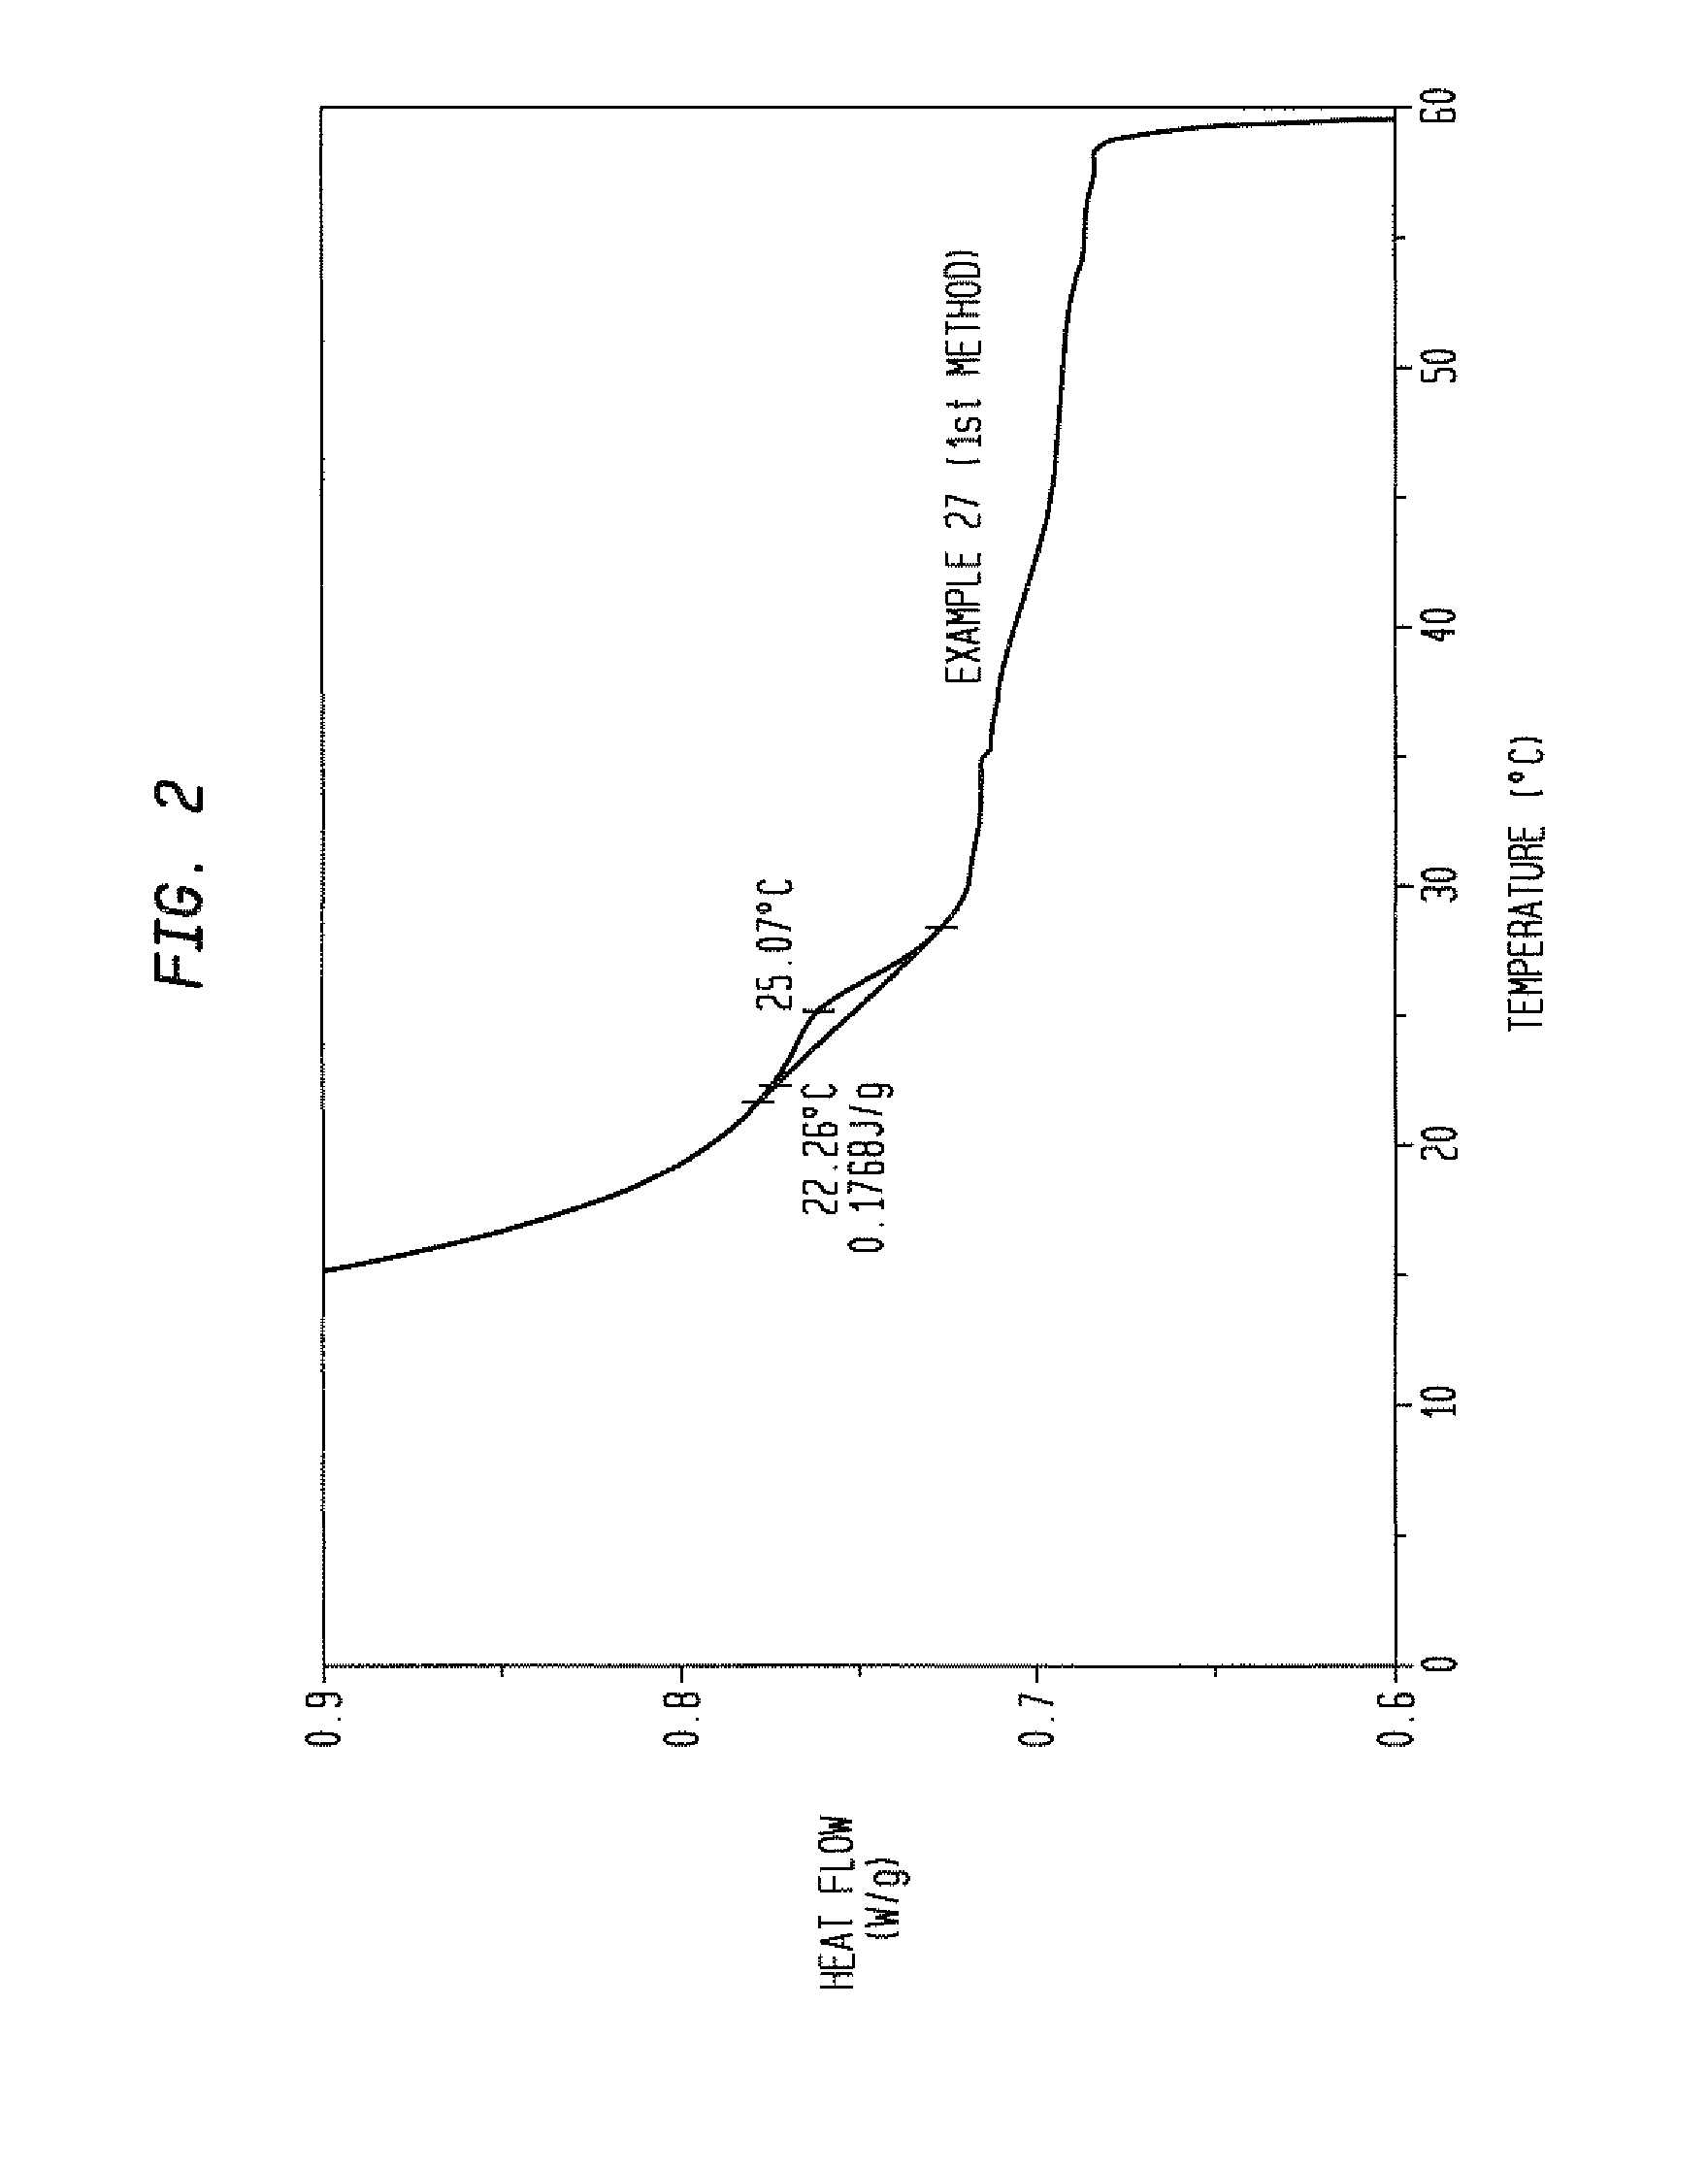 Method of providing stability for liquid cleansing compositions comprising broad selection fatty acyl isethionate surfactants